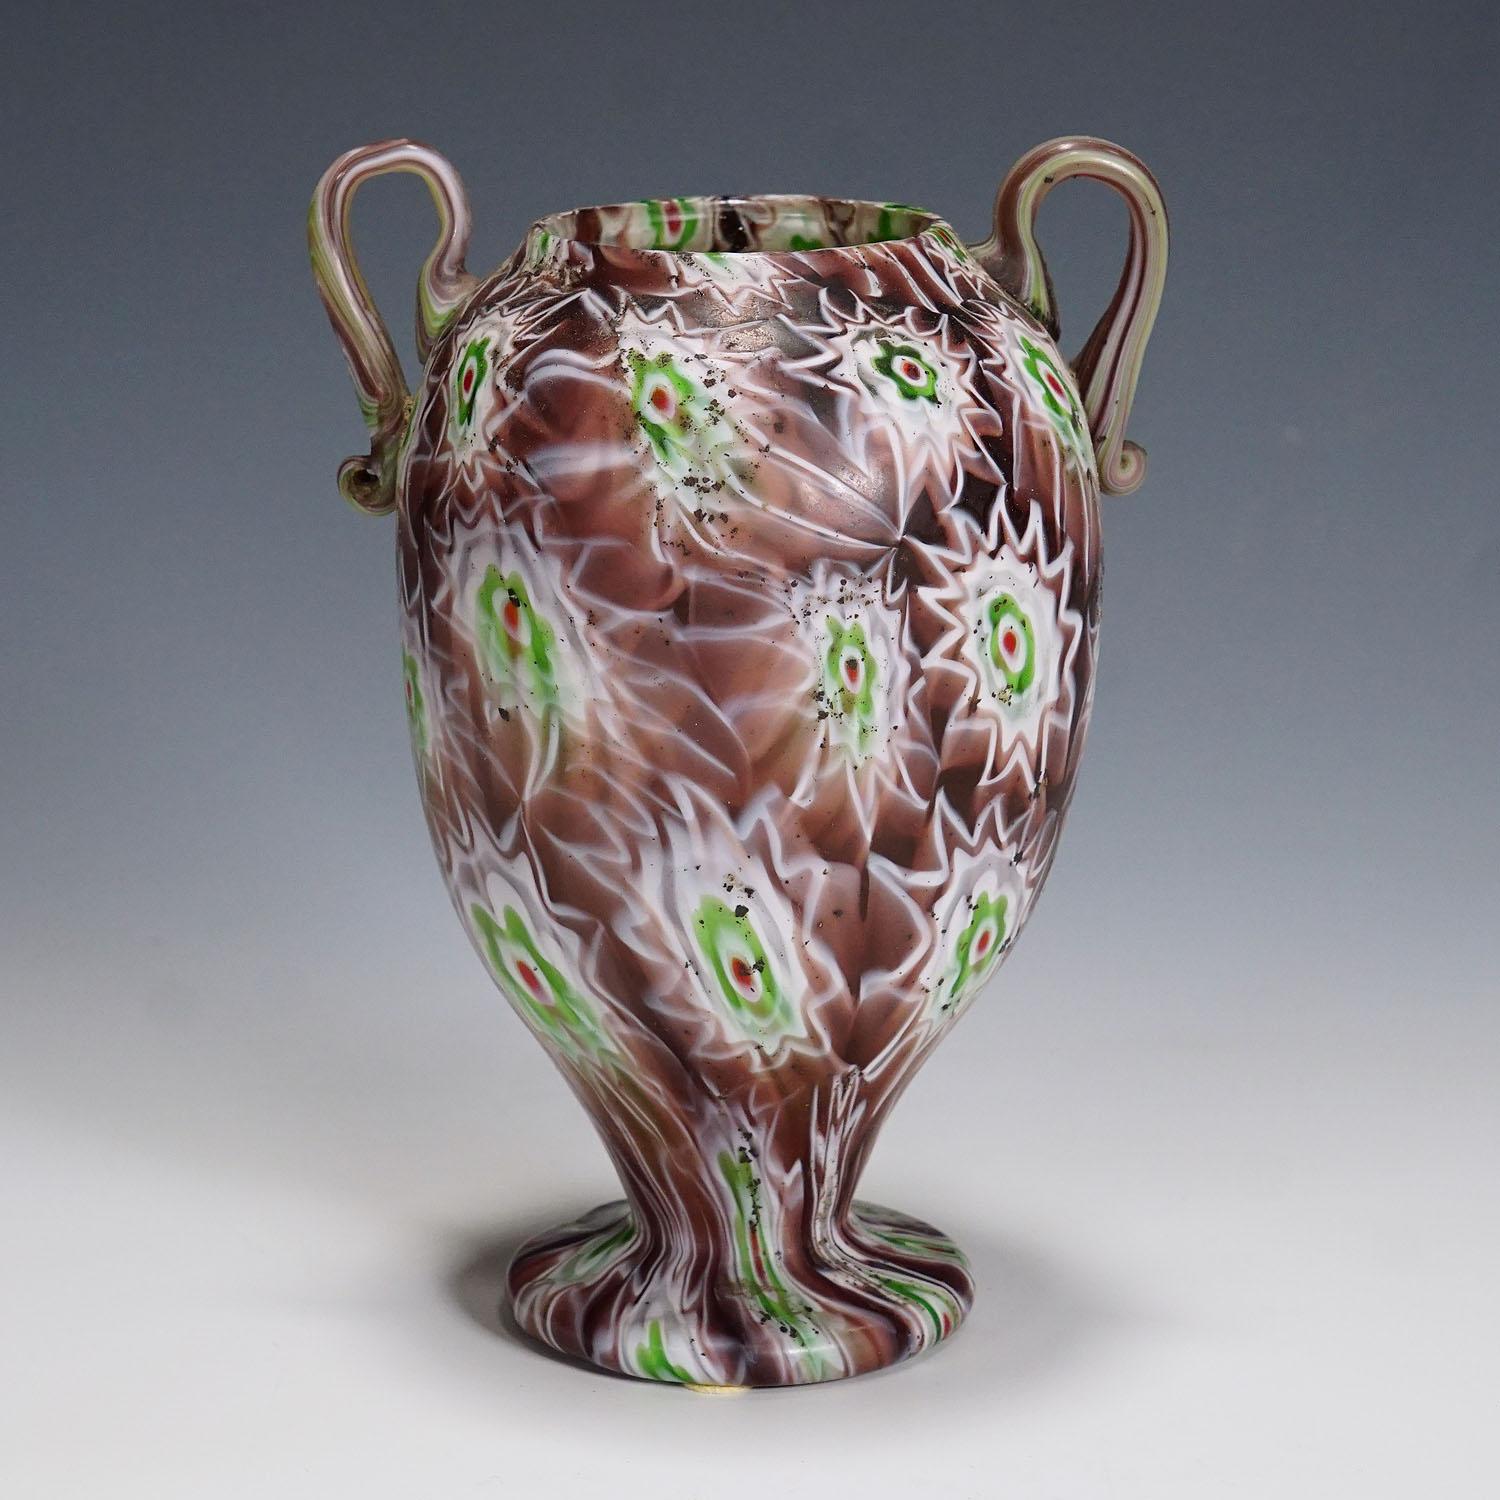 Antique Millefiori Vase in Purple, Green and White, Fratelli Toso Murano 1910

An antique Millefiori murrine glass vase manufactured by Vetreria Fratelli Toso, Murano around 1910. Made of melted polychrome murrines in purple, green, and white.